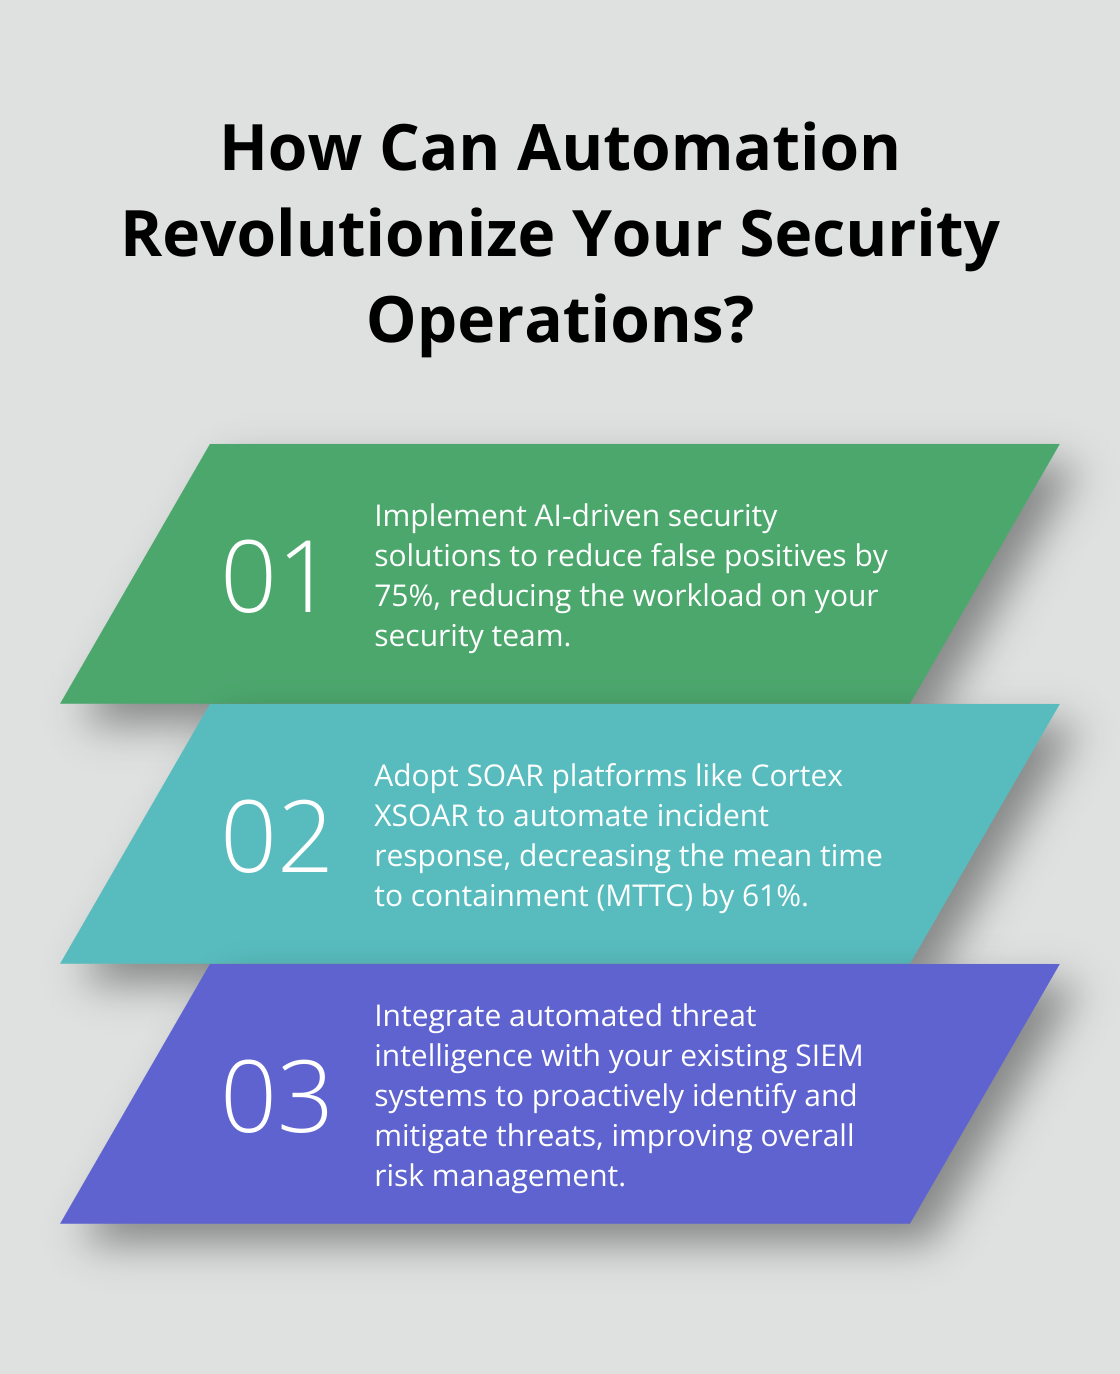 Fact - How Can Automation Revolutionize Your Security Operations?